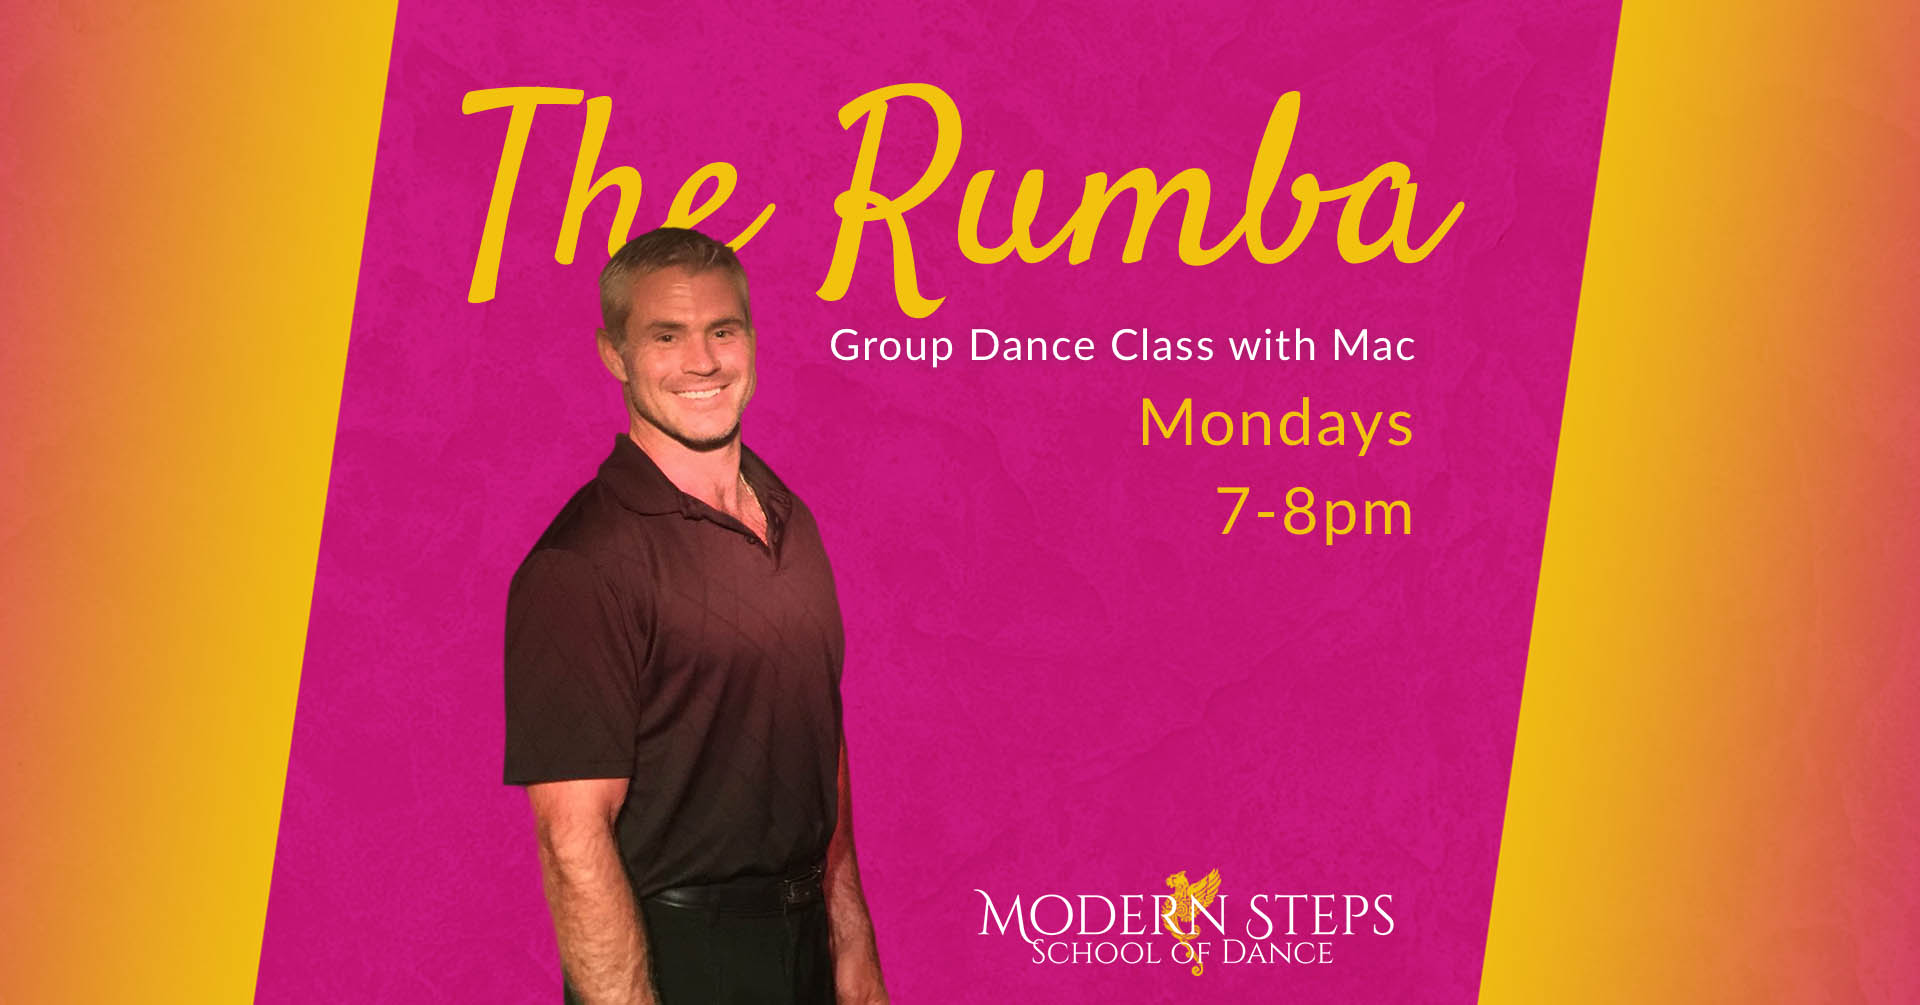 Modern Steps School of Dance Naples Florida The Rumba Dance Classes - Group Ballroom Dance Lessons - Naples Florida Things to Do